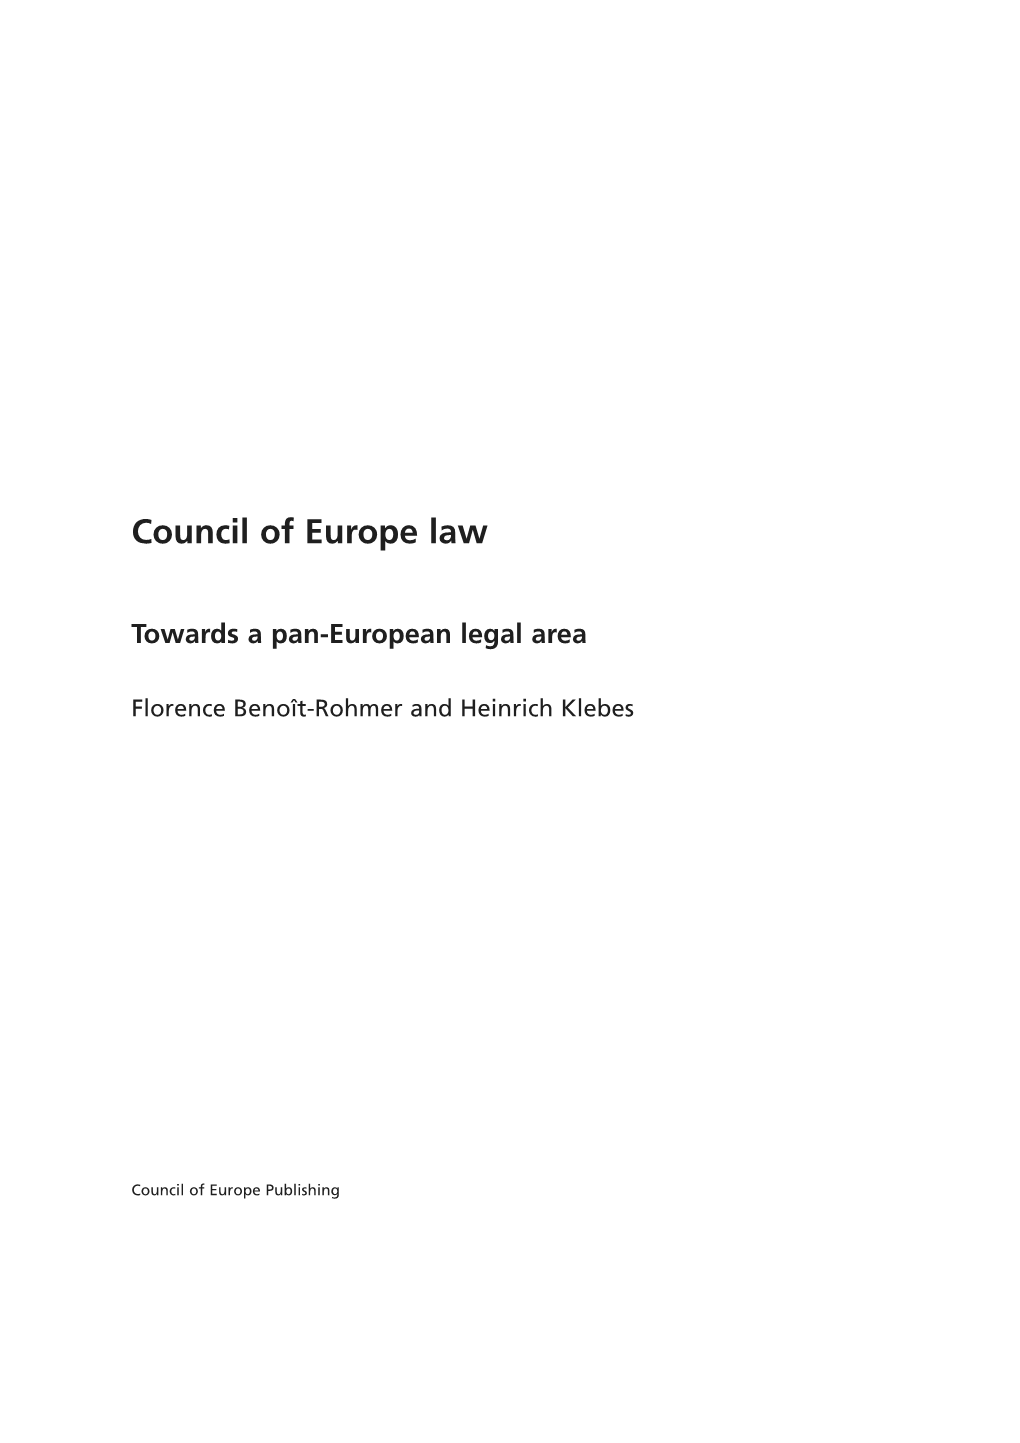 Council of Europe Law